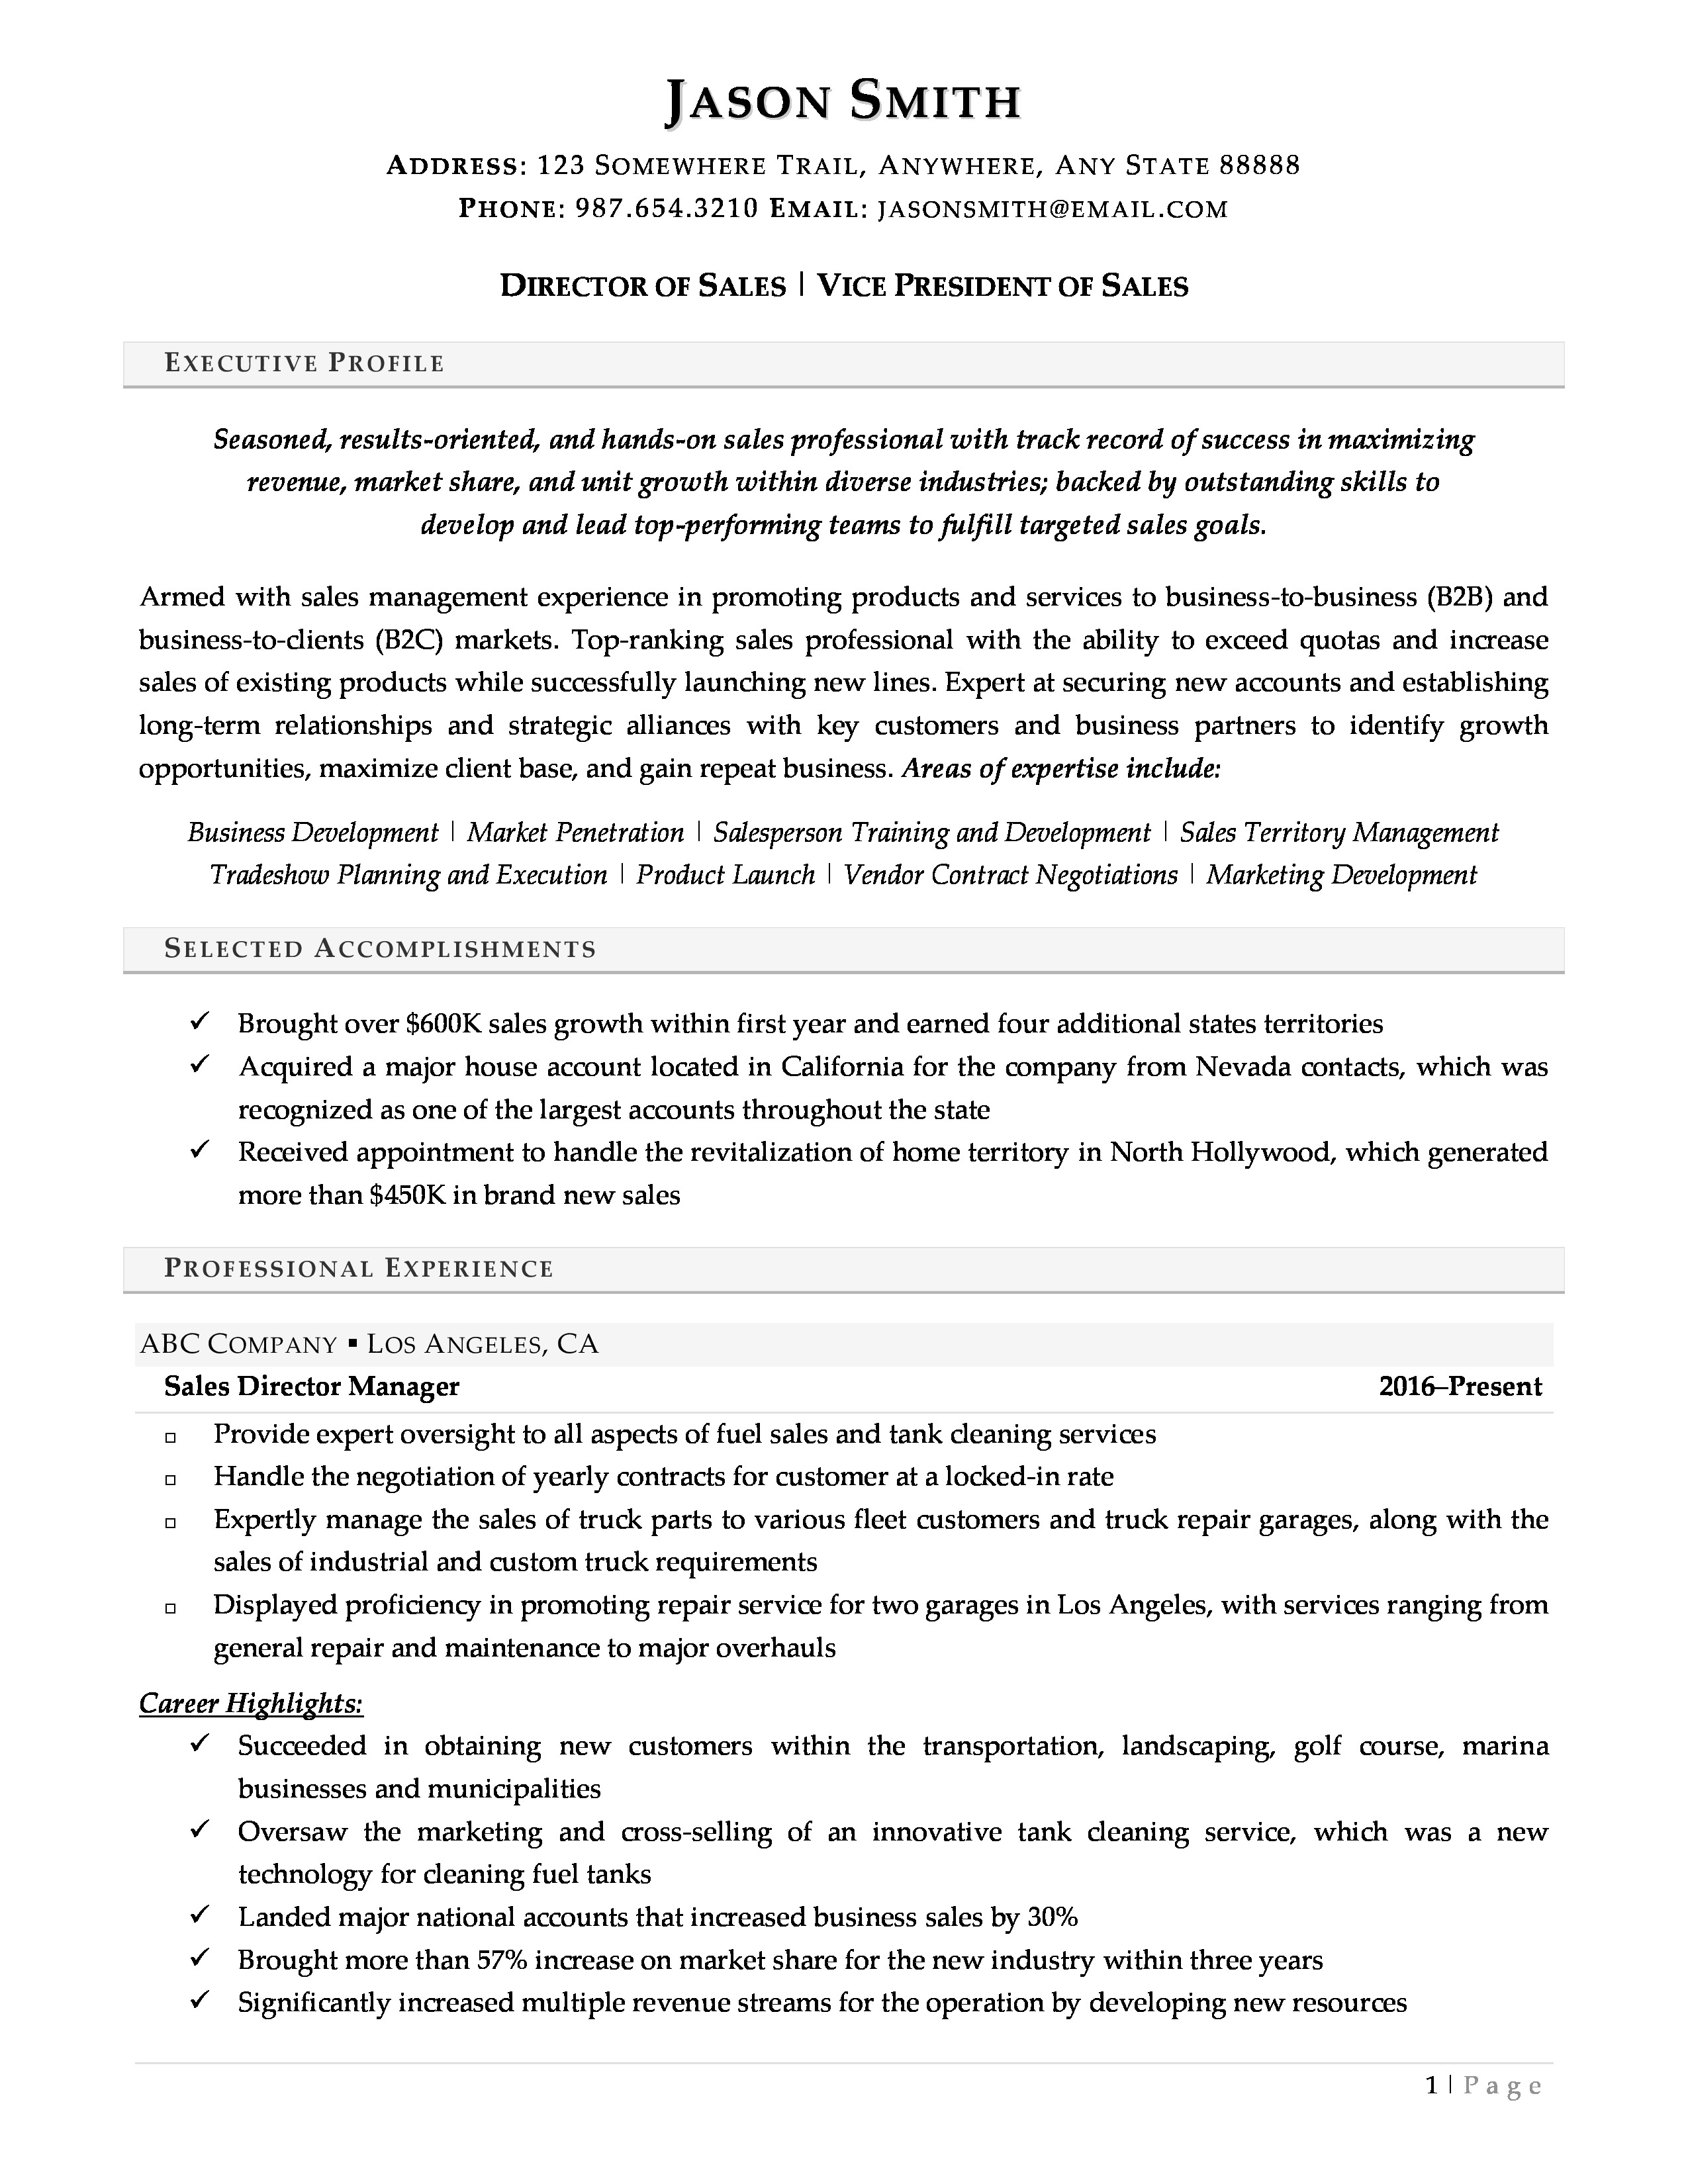 how to write a resume for executive positions